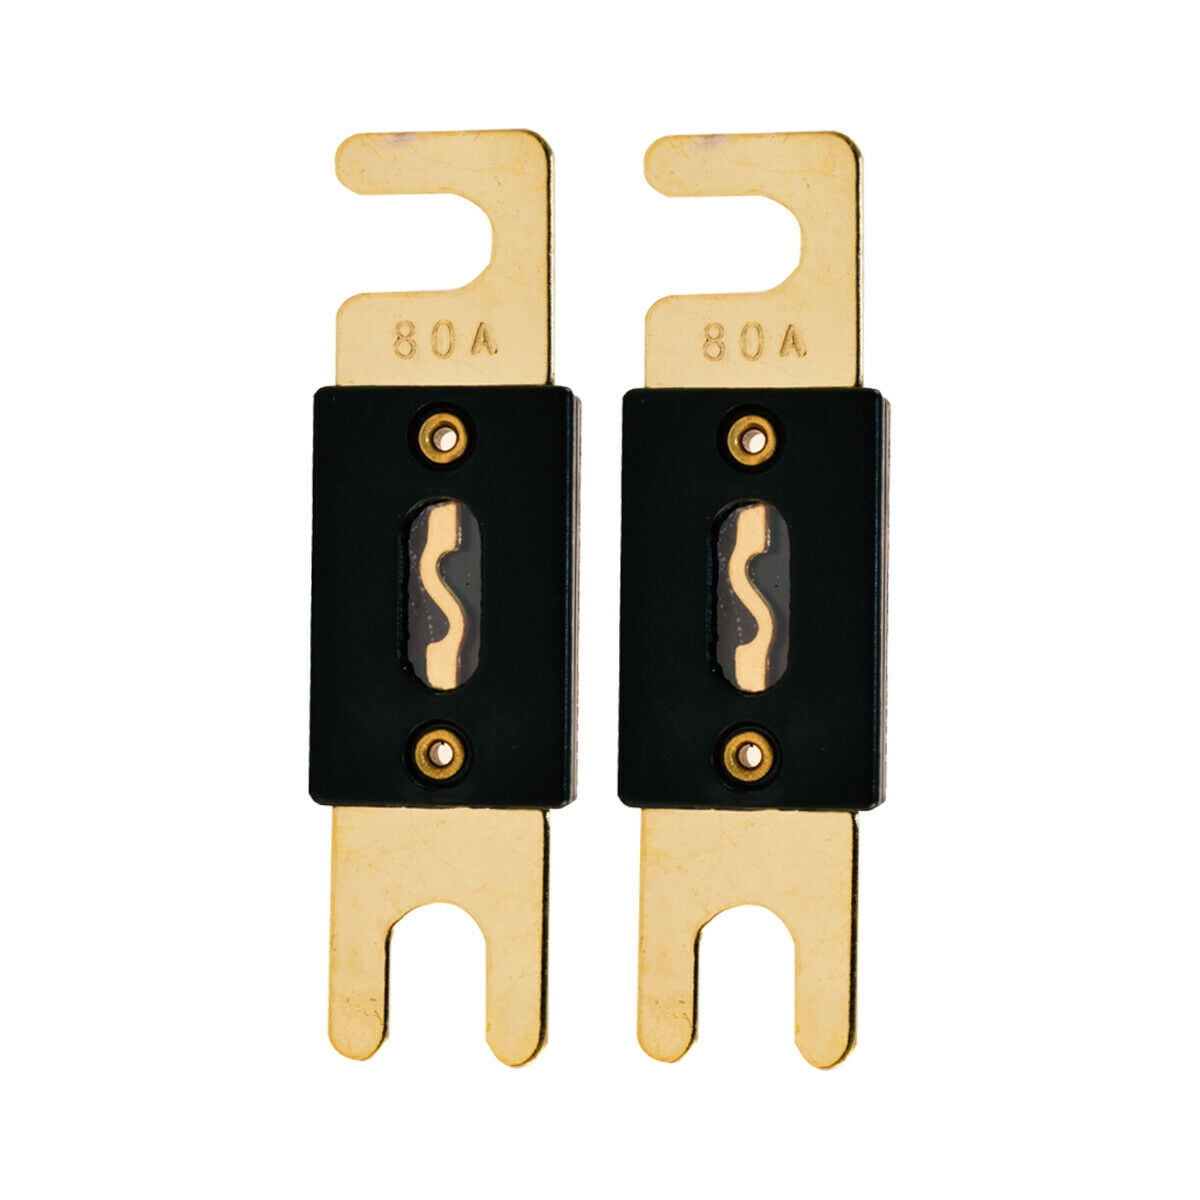 Woljay 0 2 4 Gauge ANL-80A ANL Fuse holder Gold Plated with Fuse 80A 